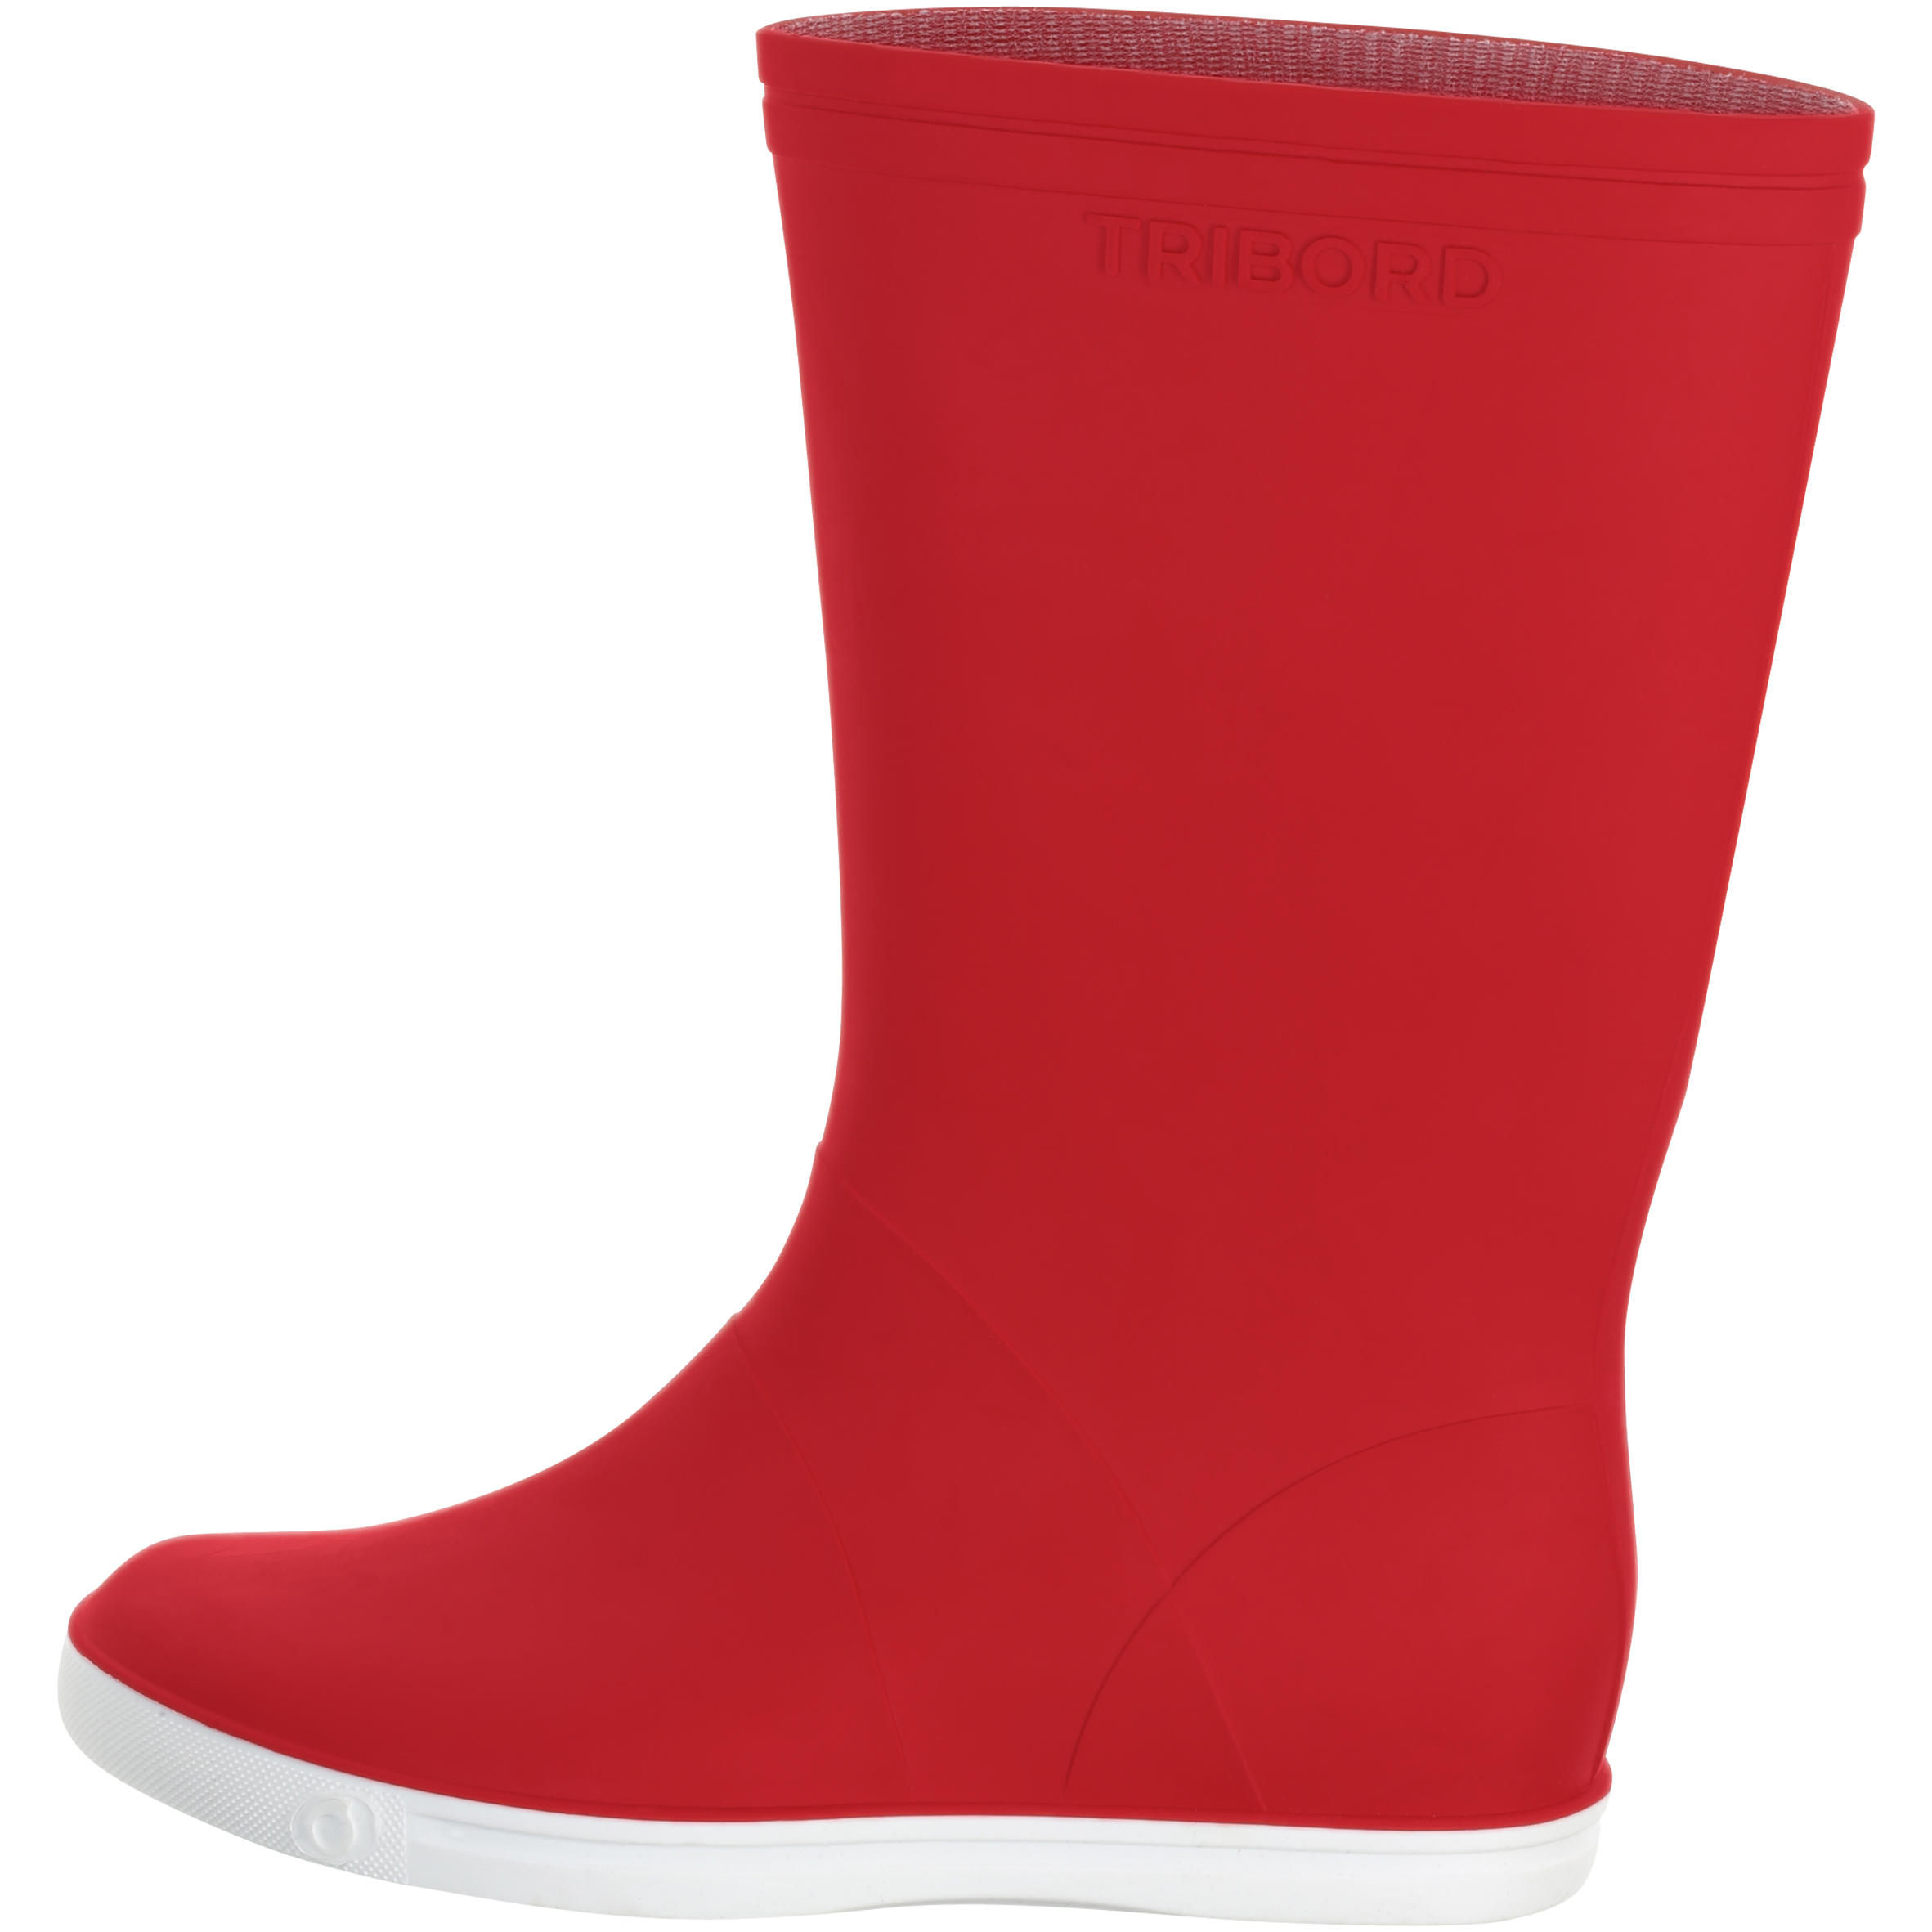 Sailing 100 Adult Wellies  - Red 3/12